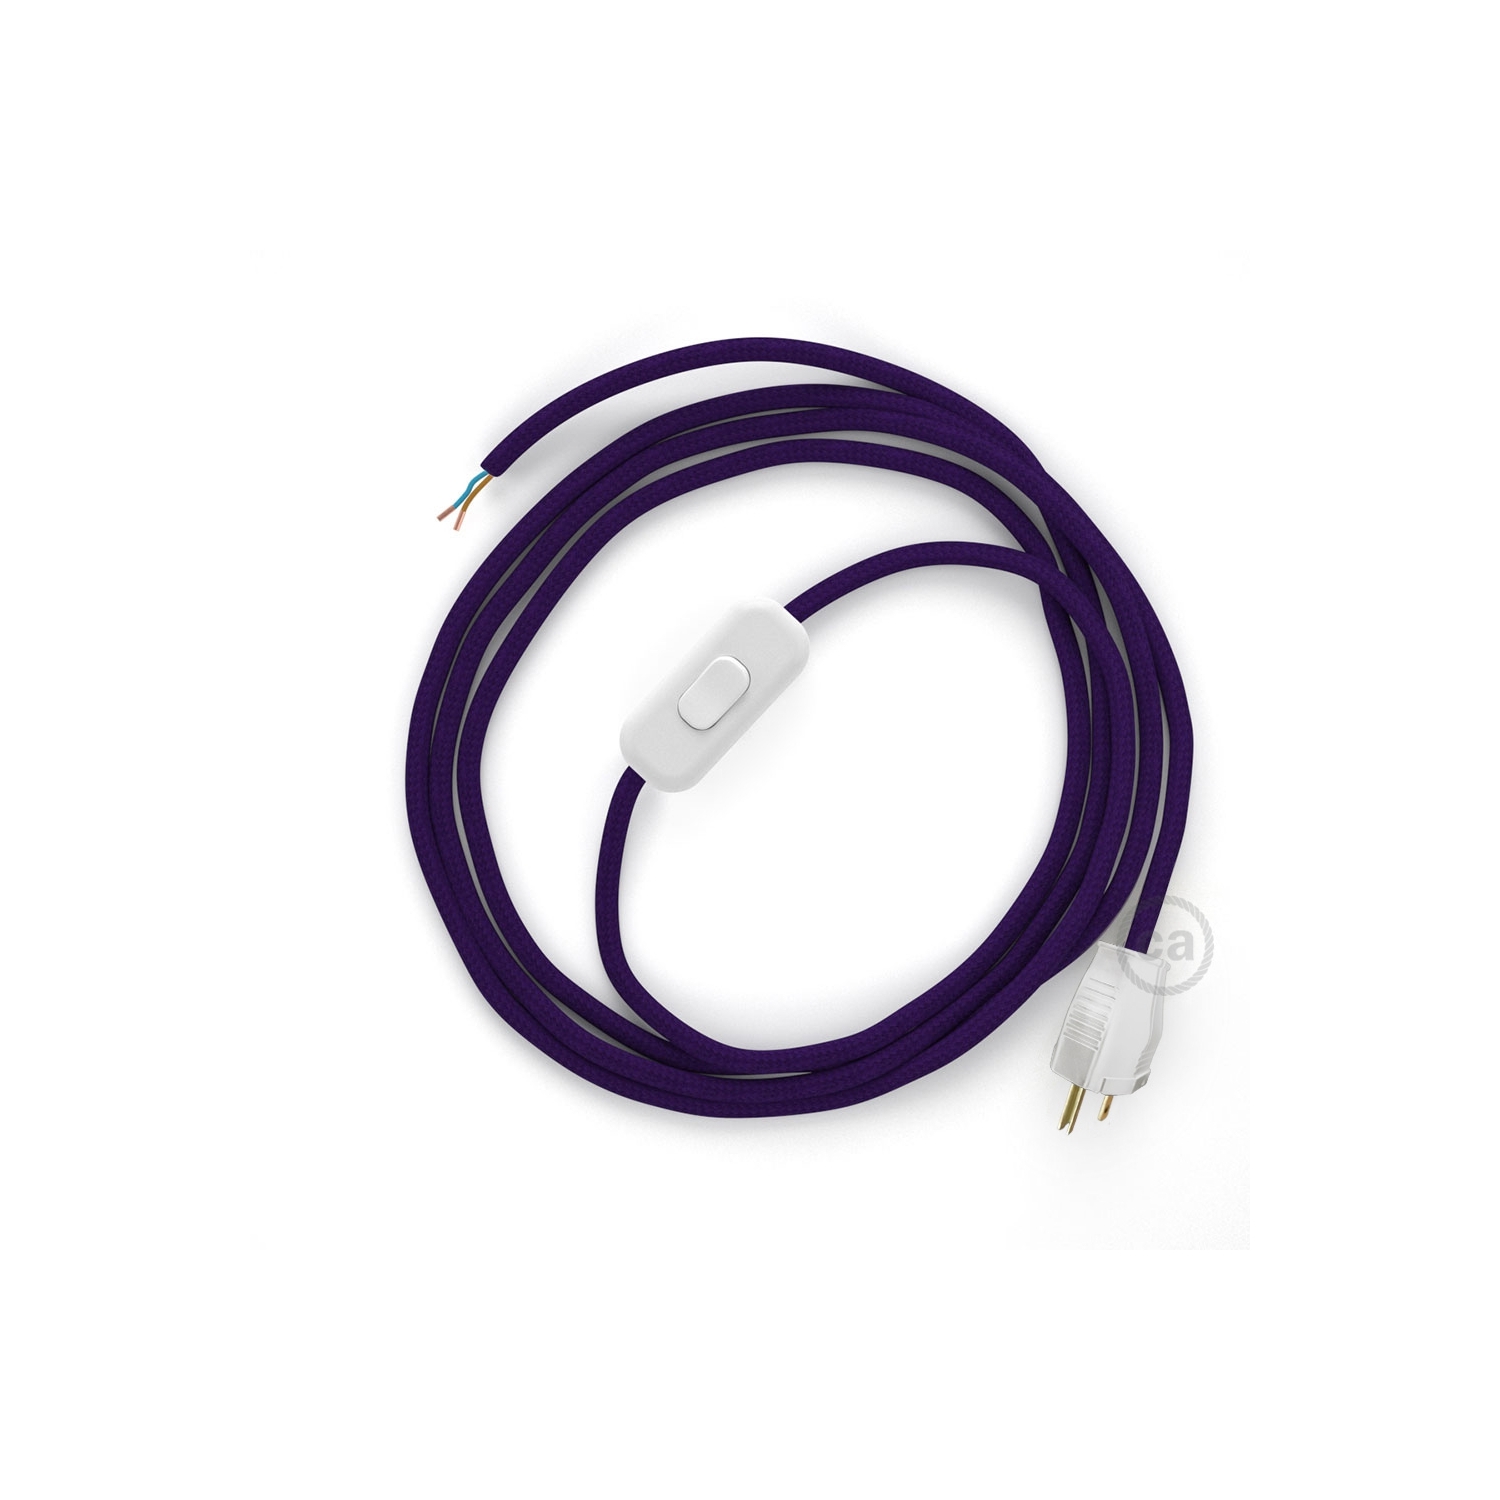 Power Cord with in-line switch, RM14 Violet Rayon - Choose color of switch/plug